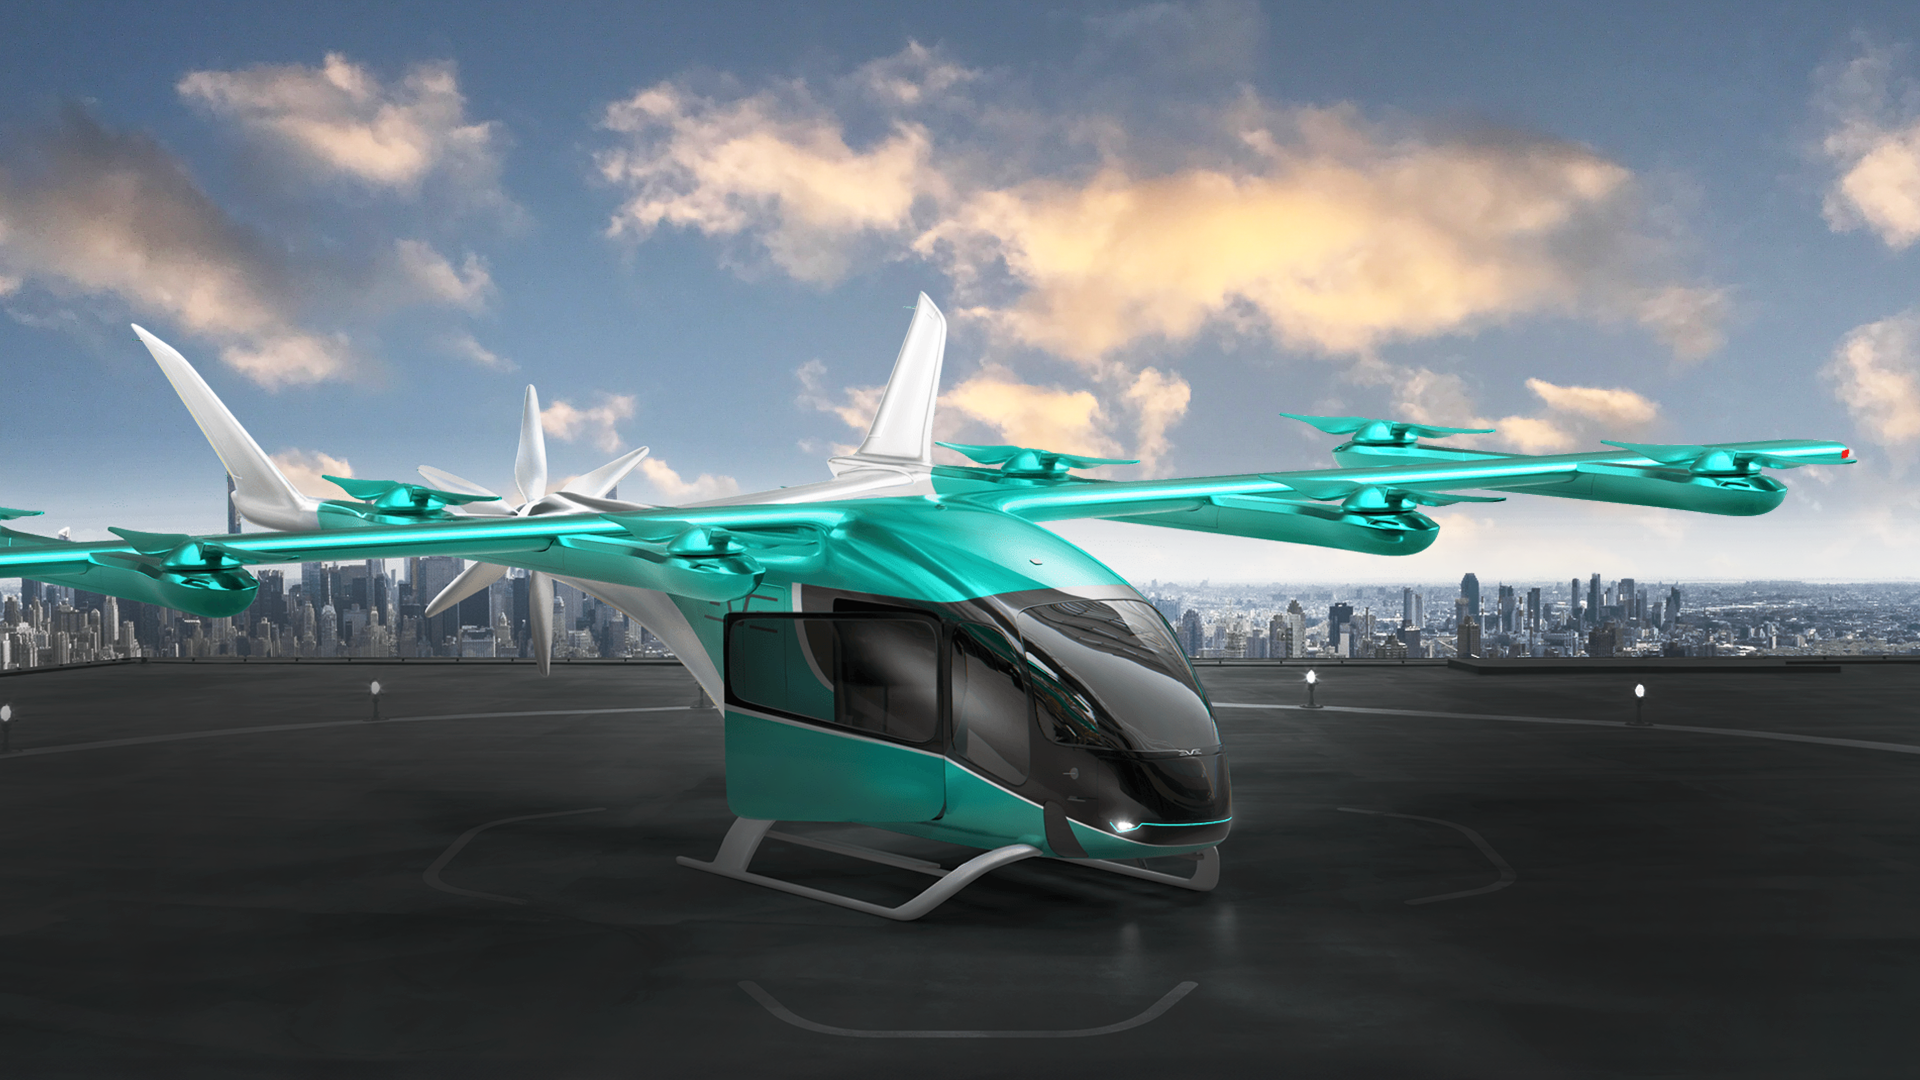 Eve Air Mobility Names 4 New Suppliers for Electric Air Taxi